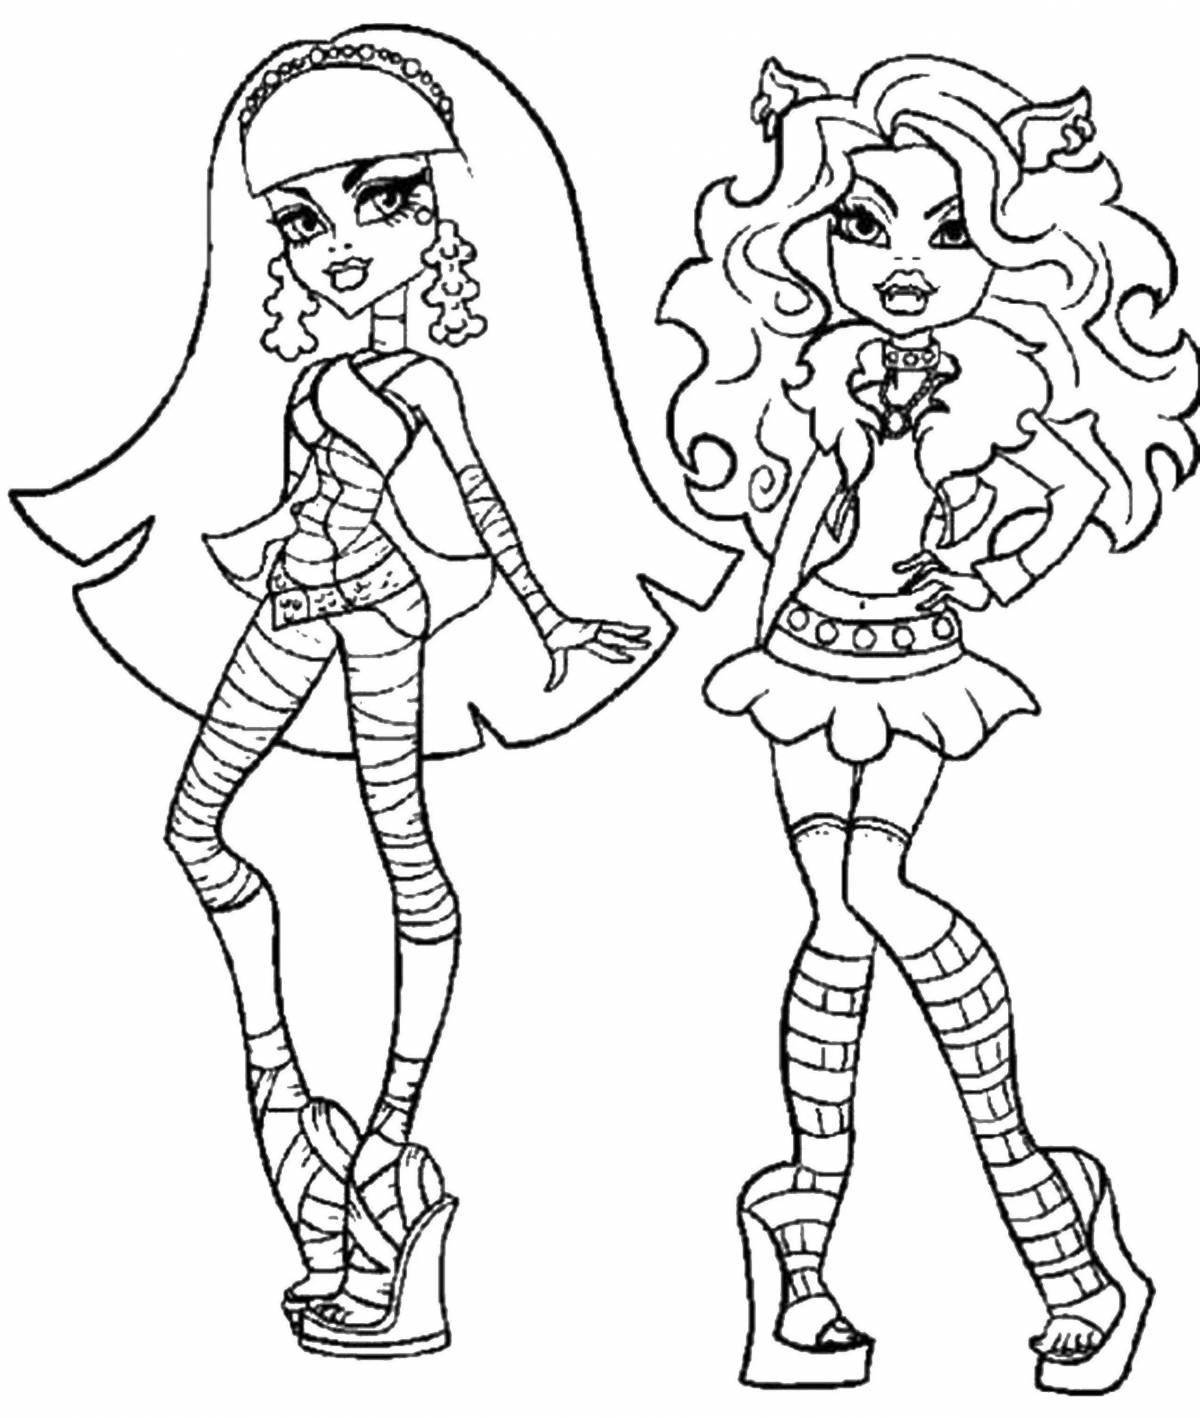 Amusing coloring monster high games